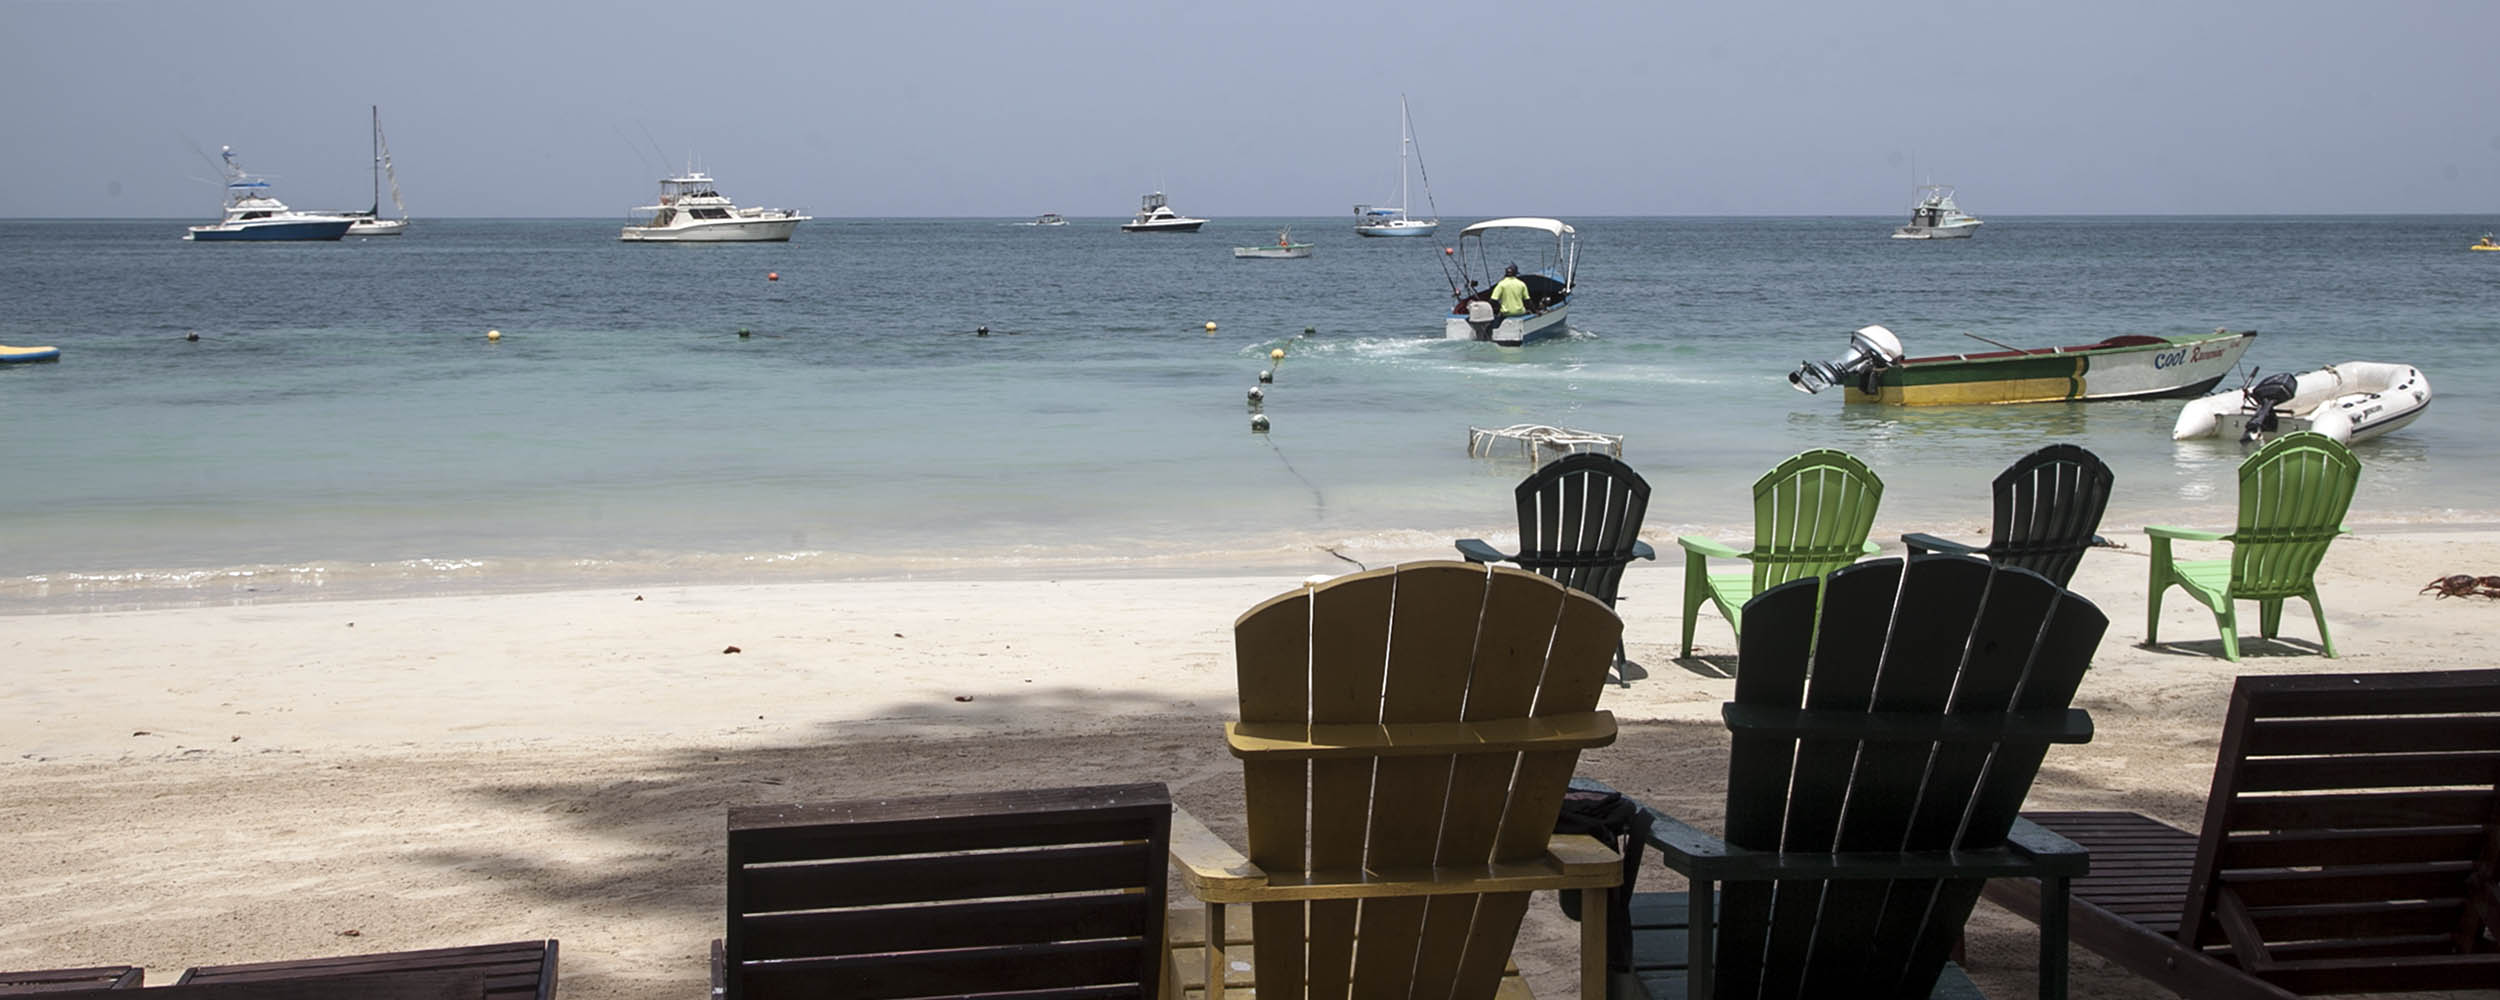 Ray's Water Sports - Negril Beach View, Negril Jamaica